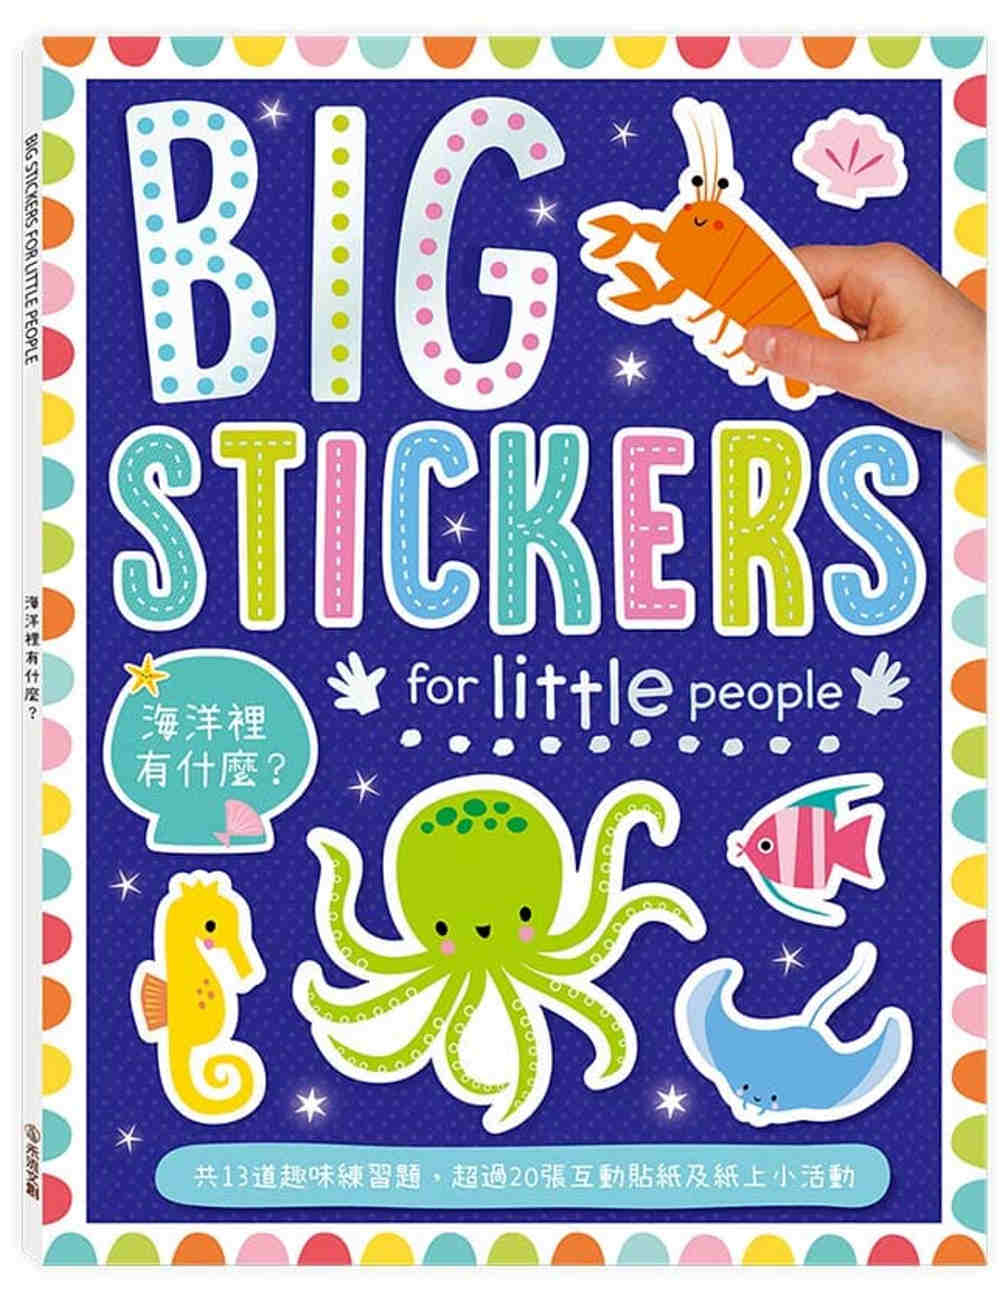 BIG STICKERS FOR LITTLE PEOPLE...